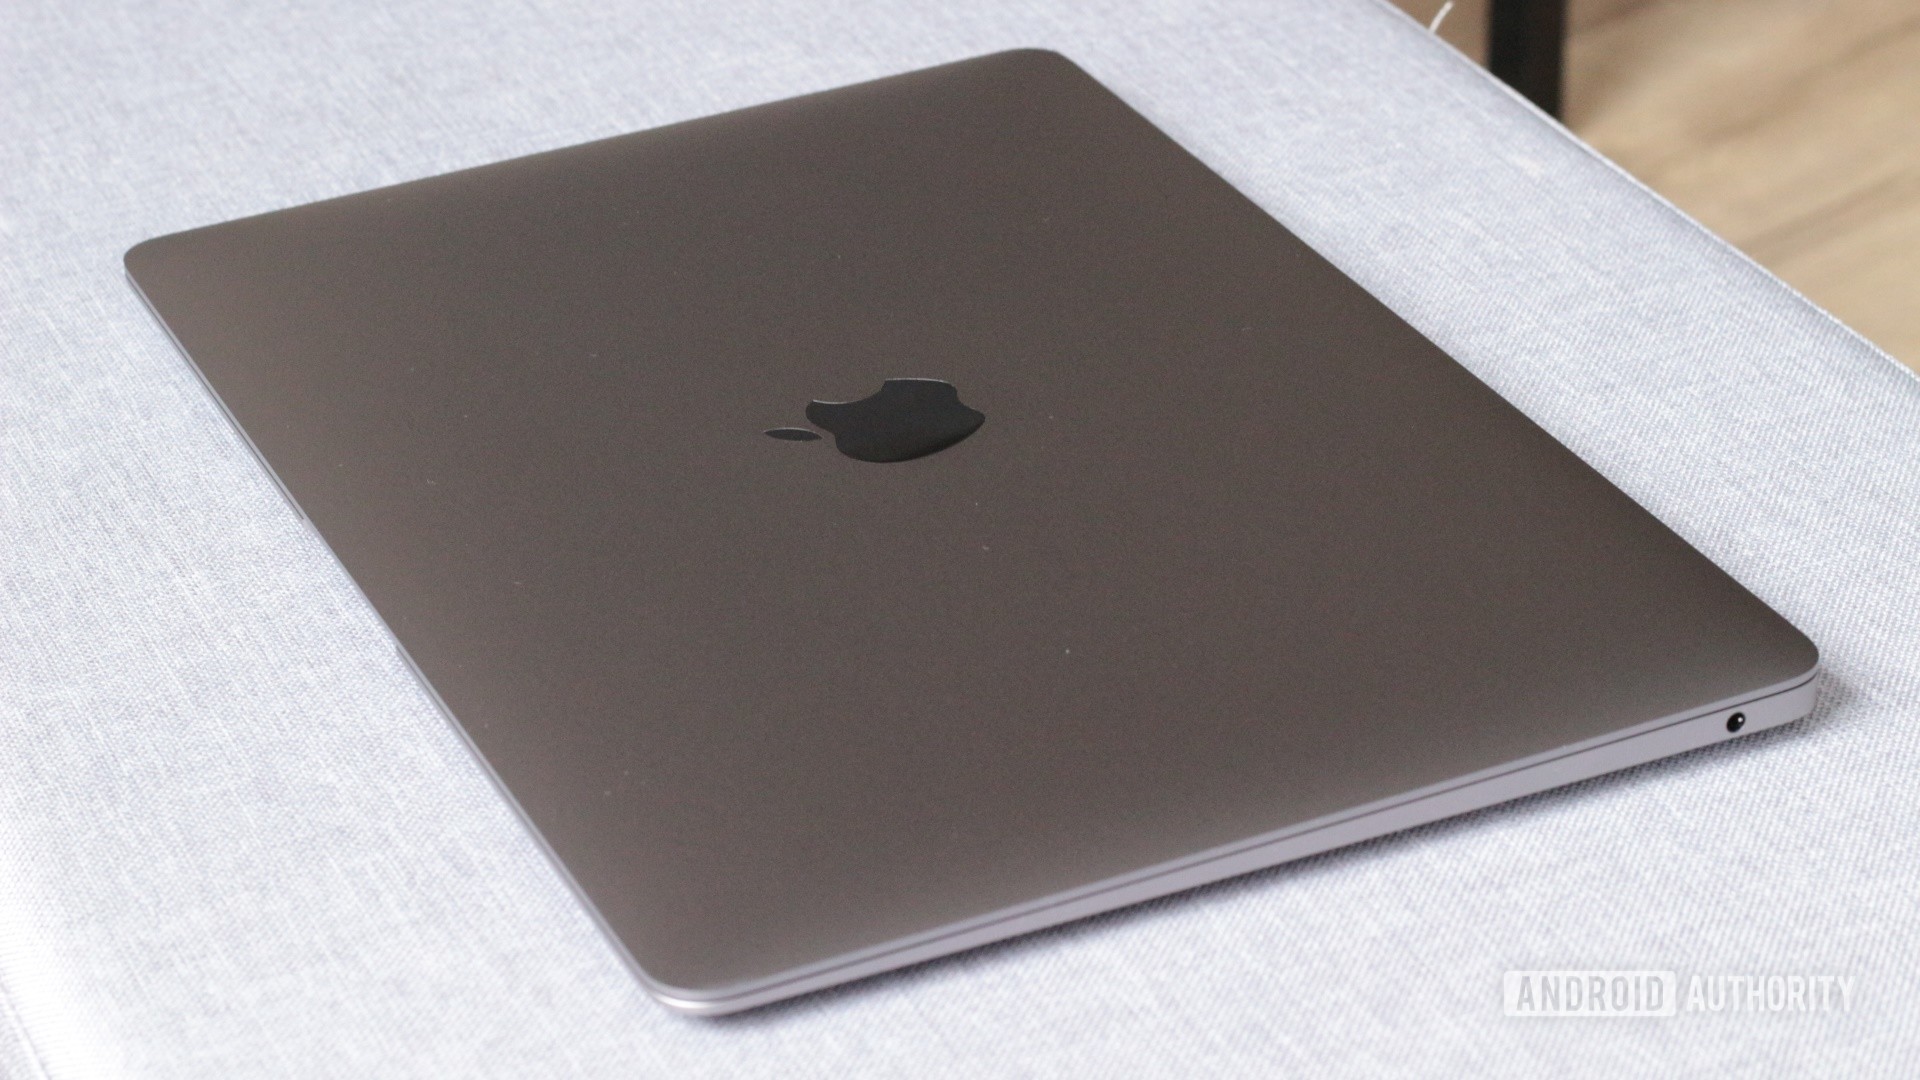 Apple MacBook Air (M1) review: Apple's silicon for Apple's